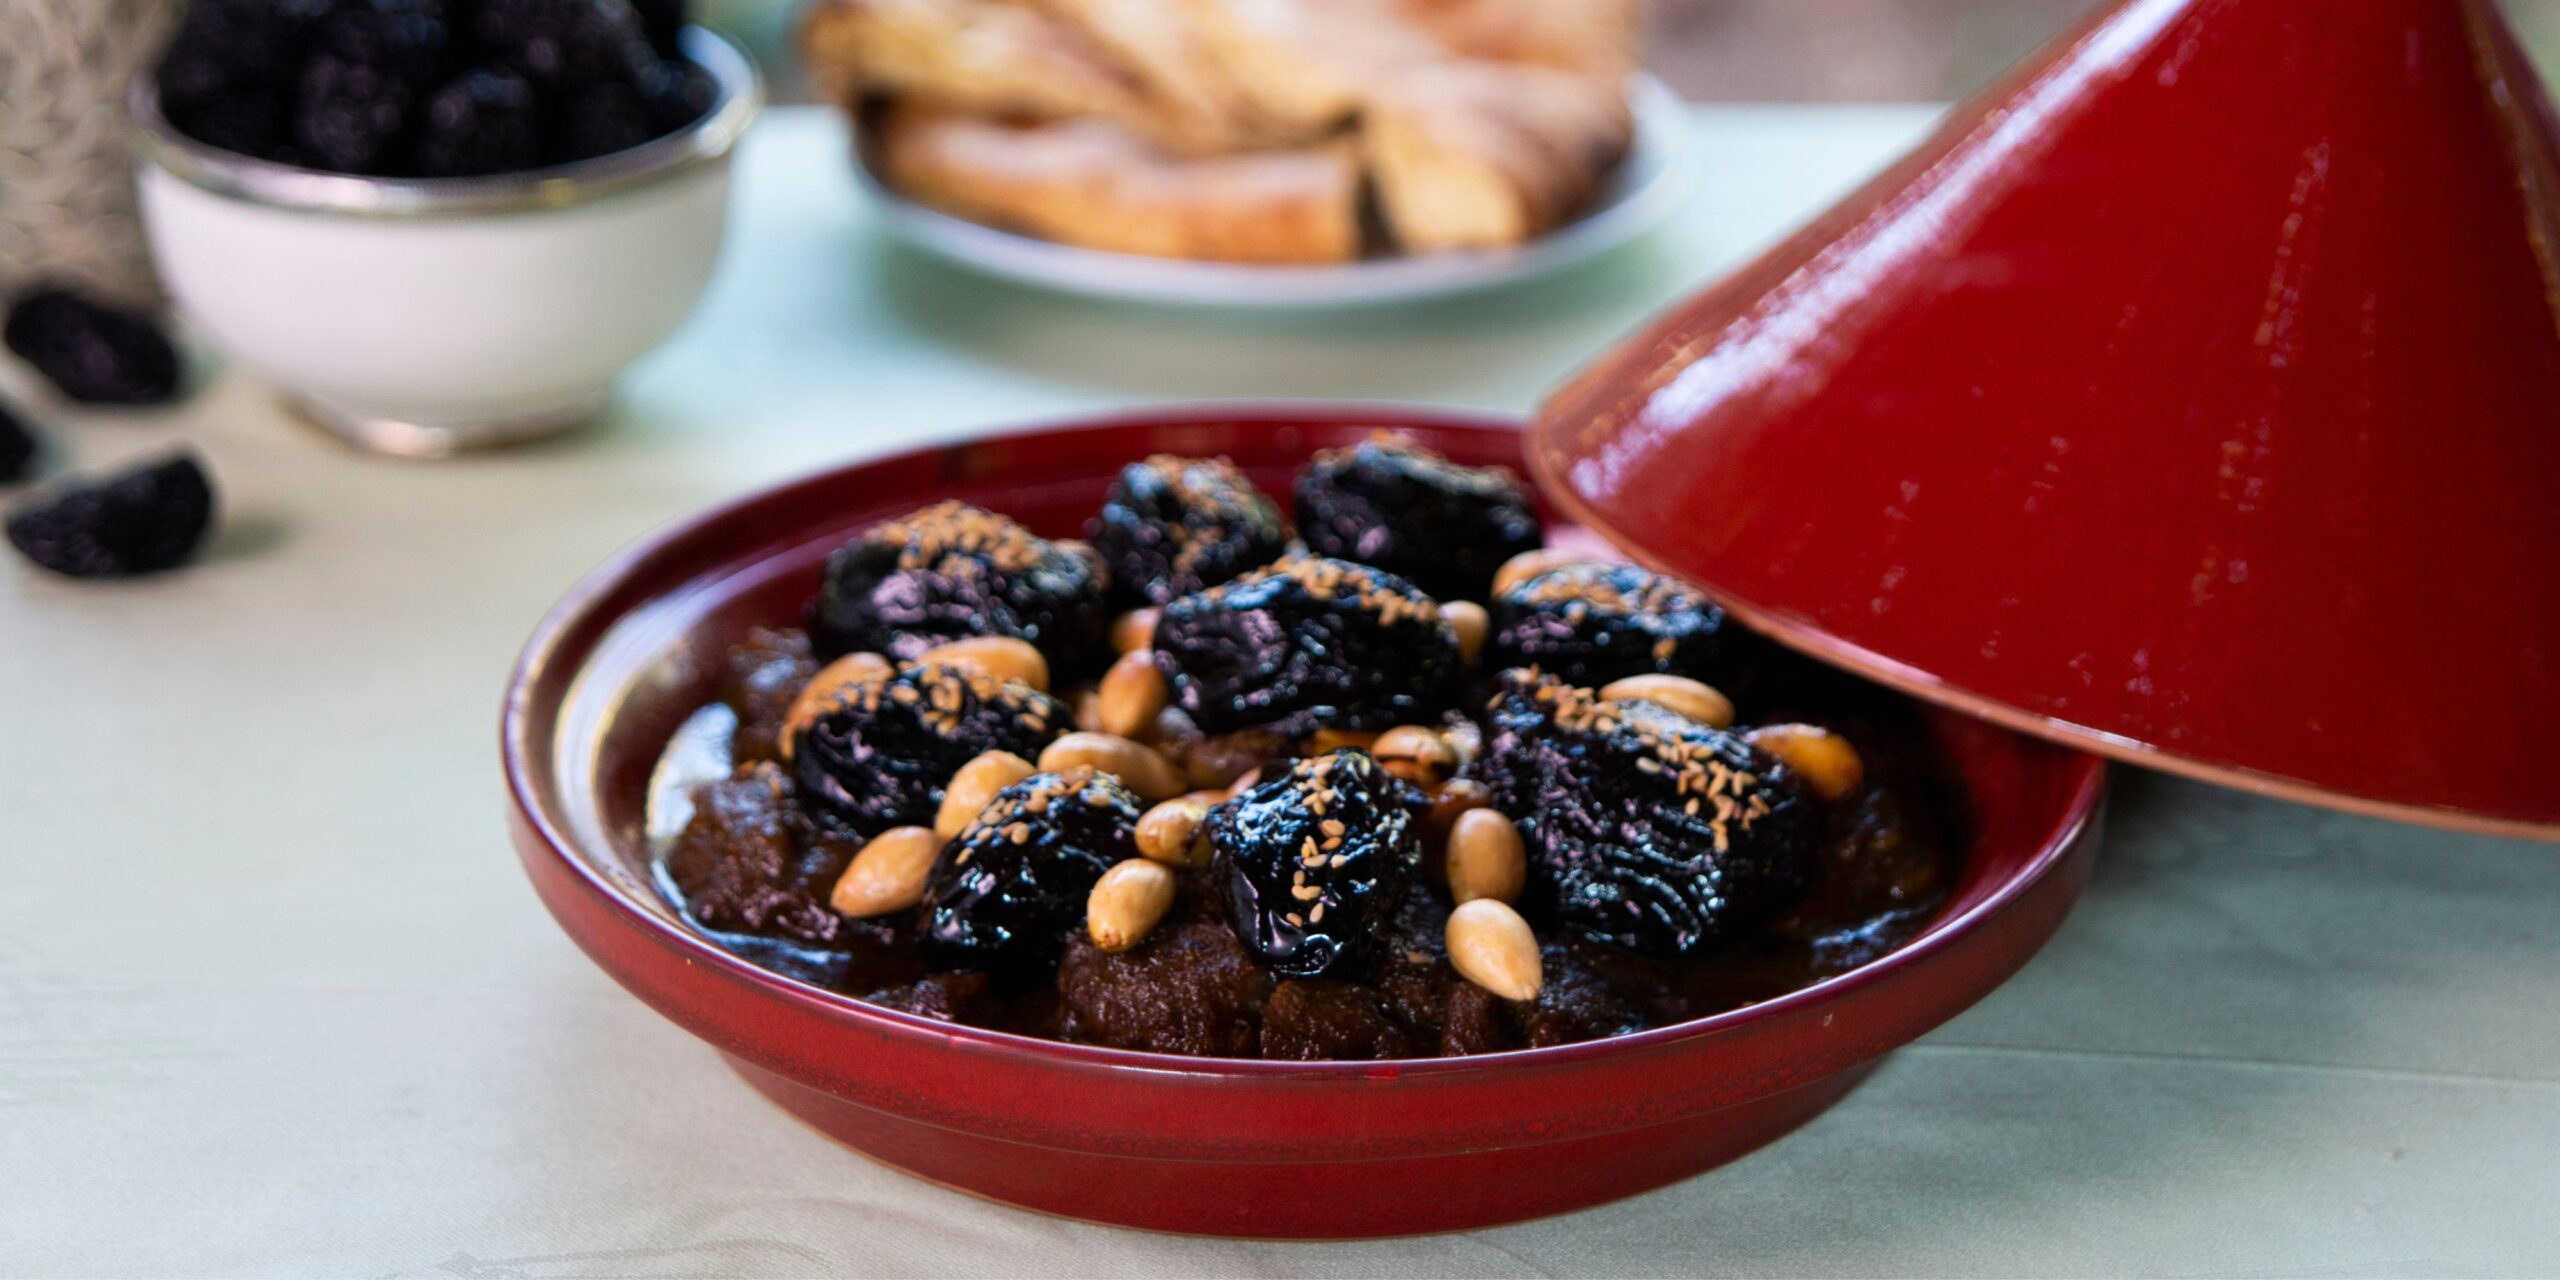 This is one of my favourite sweet and savoury Moroccan dish because I find that the various flavours of this tagine beautifully balance each other. The sweet and caramelised prunes work perfectly with the deep and richly spiced meat and onion sauce.